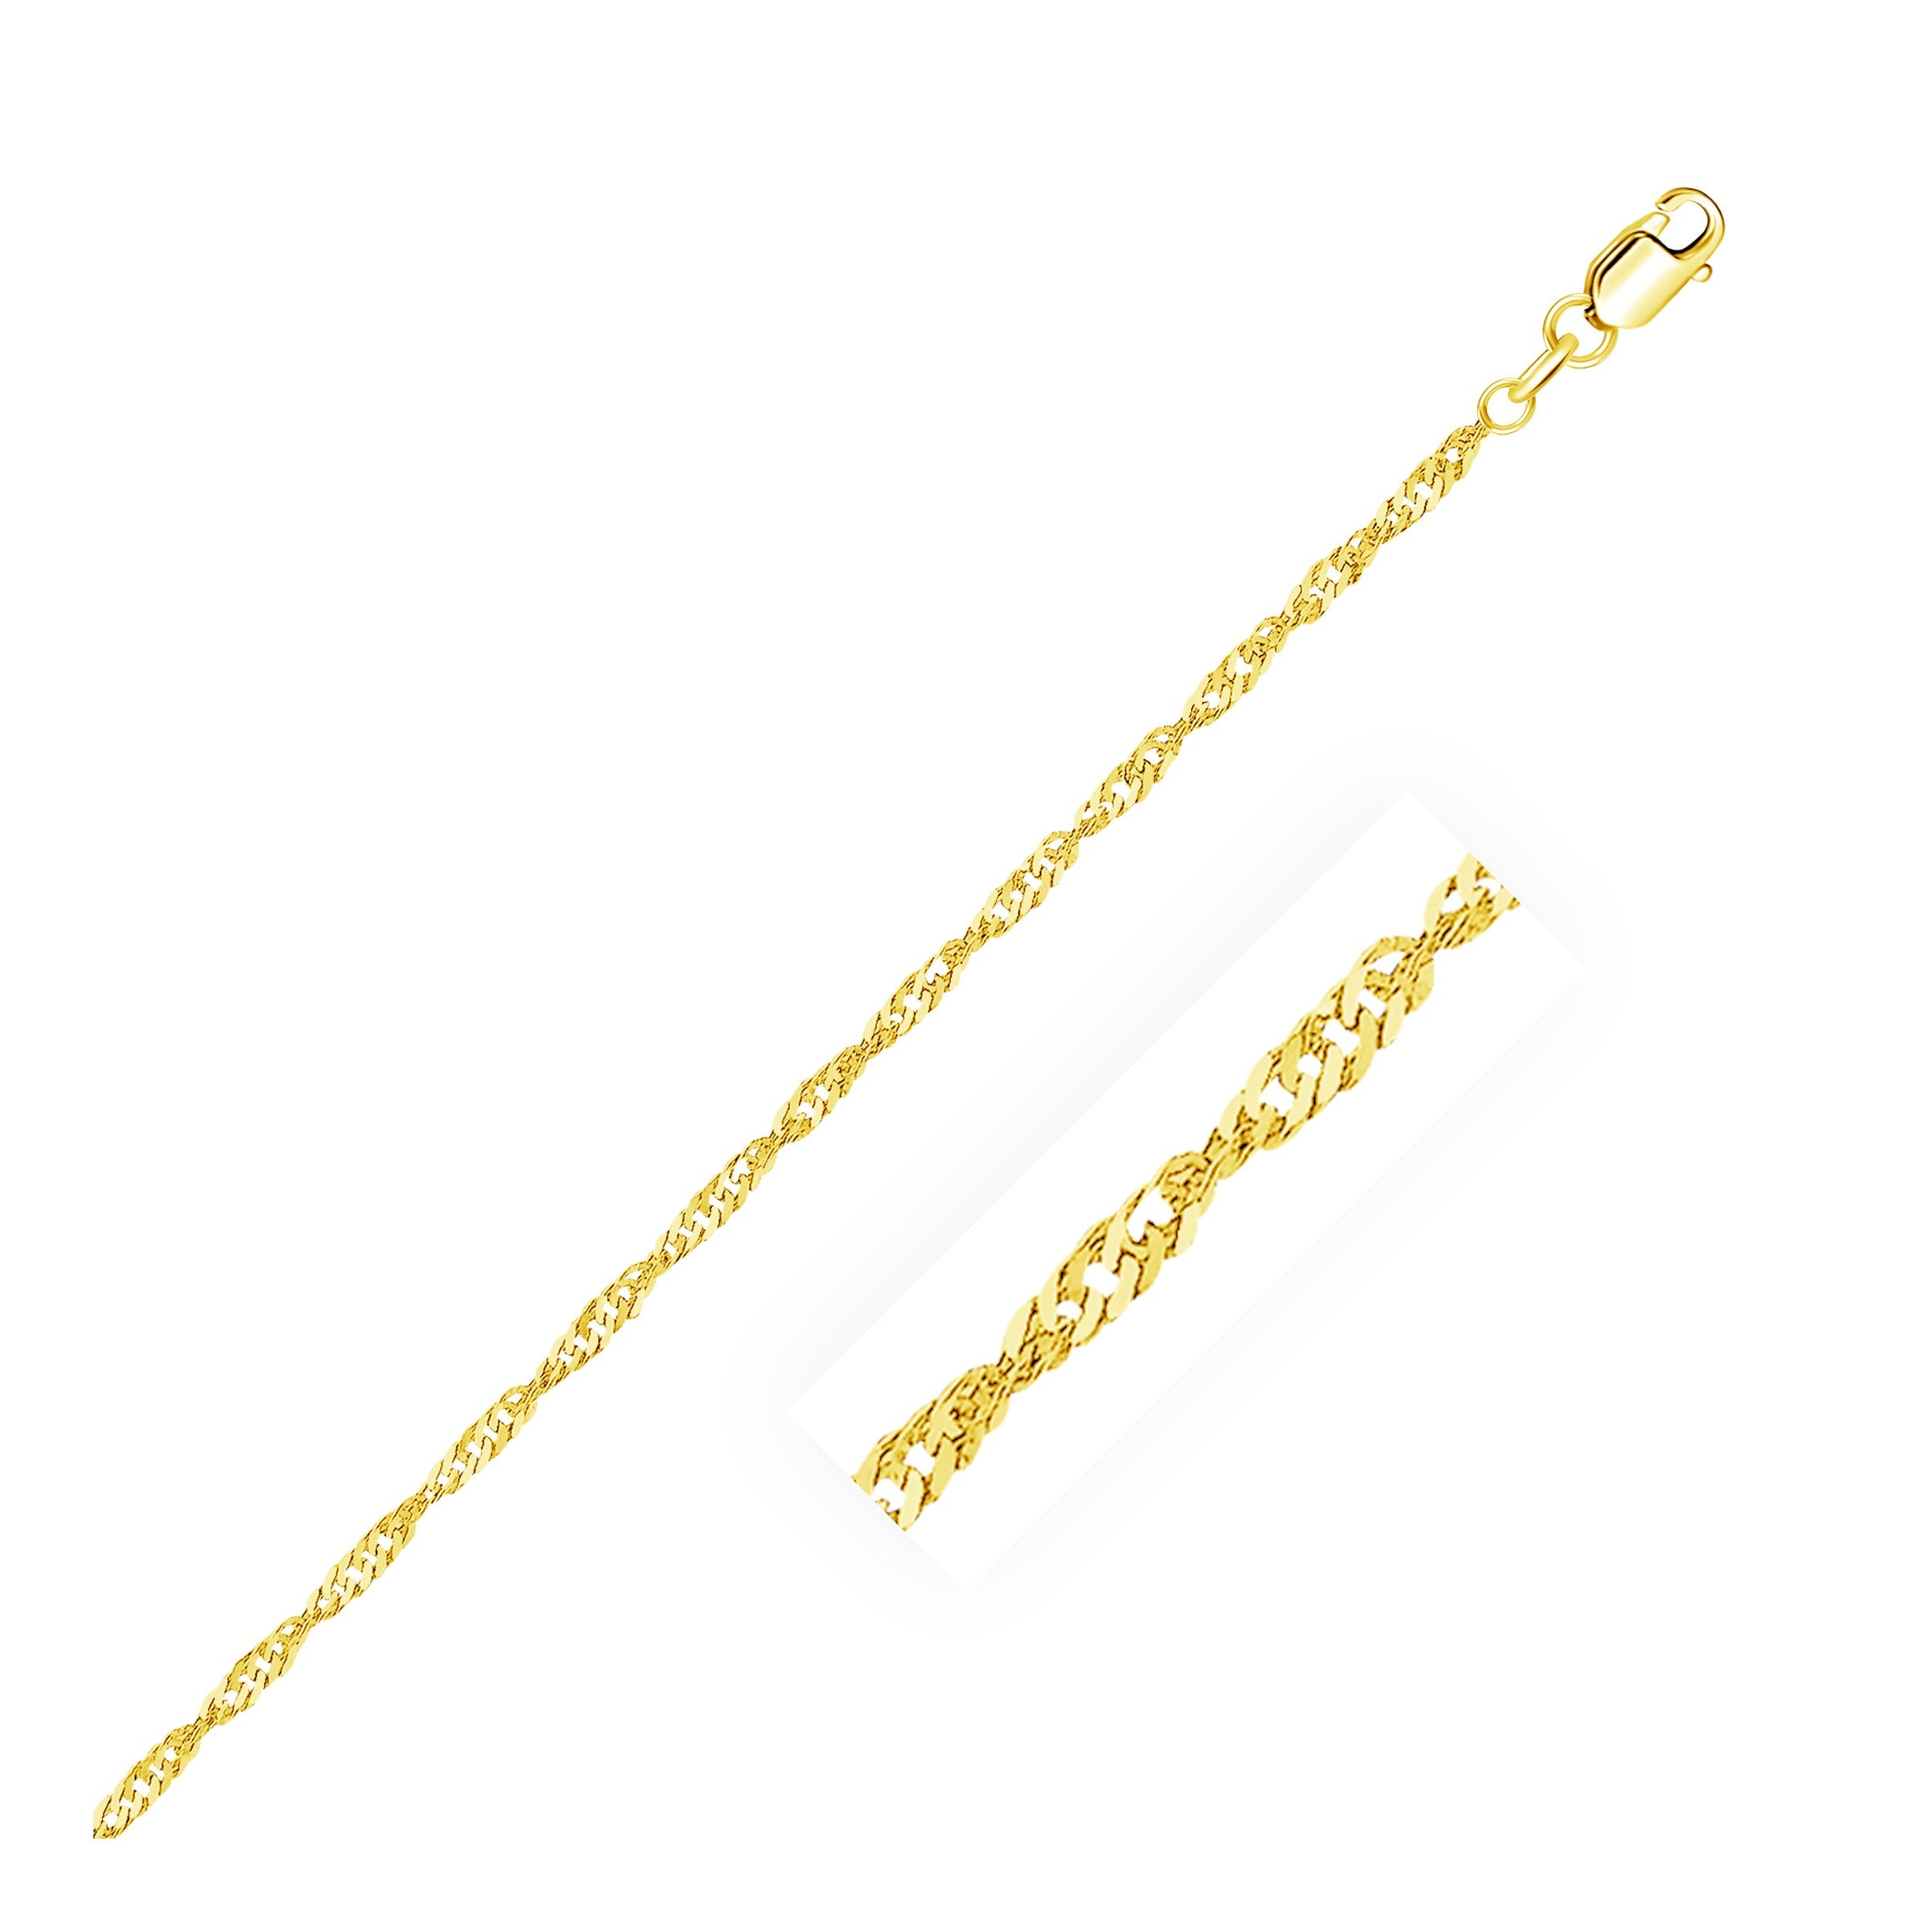 2.1mm 14k Yellow Gold Singapore Anklet